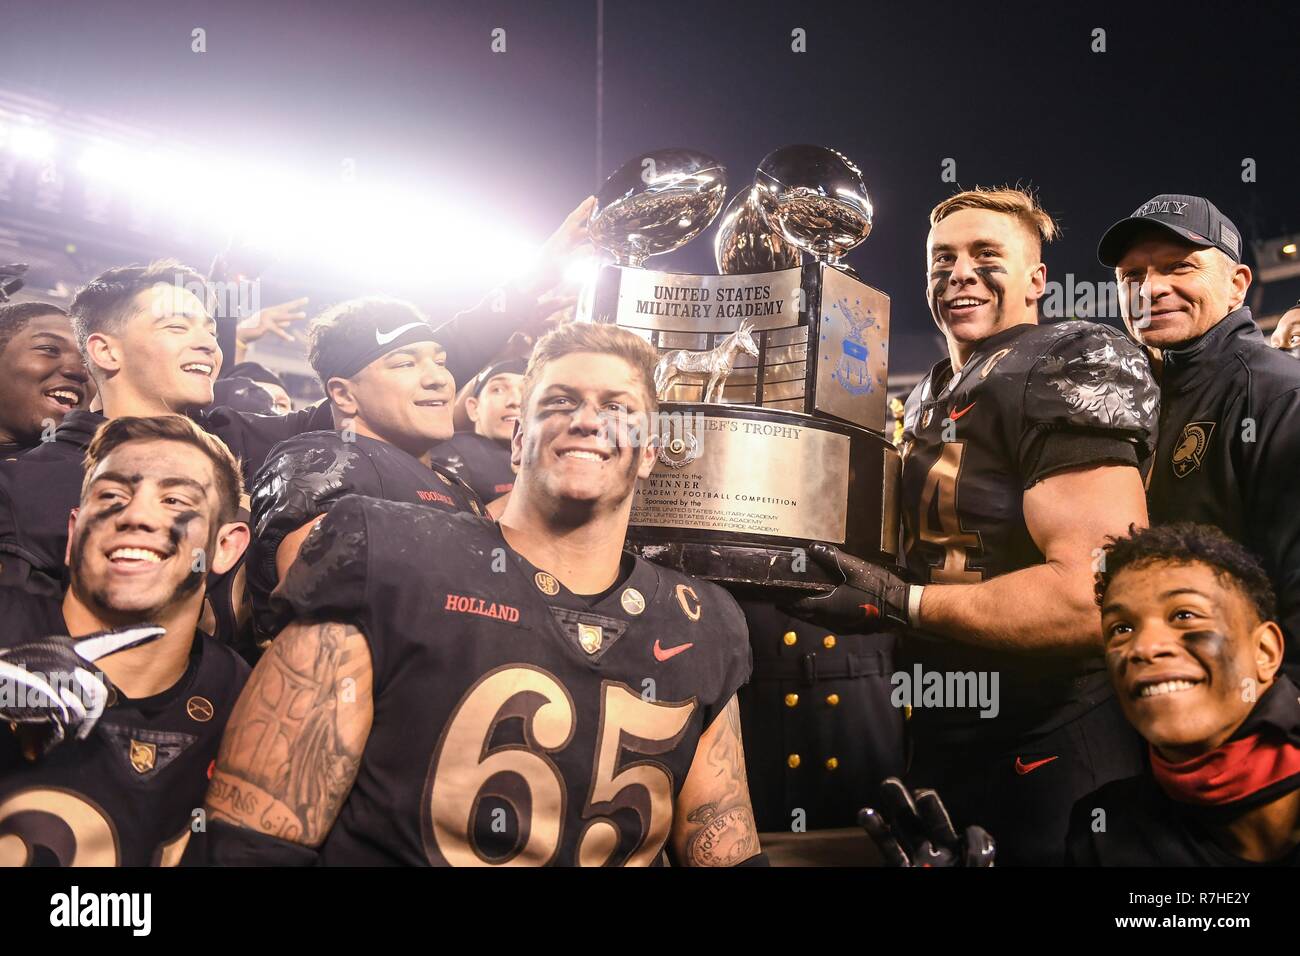 West Point football players and head coach, Jeff Monken, right, pose with the Commander-in-Chiefs Trophy as they celebrate their  victory over Navy in the 119th Army Navy game at Lincoln Financial Field December 8, 2018 in Philadelphia, Pennsylvania. The Army Black Knights trounced Navy 17-10 in the third straight win over their rival. Stock Photo